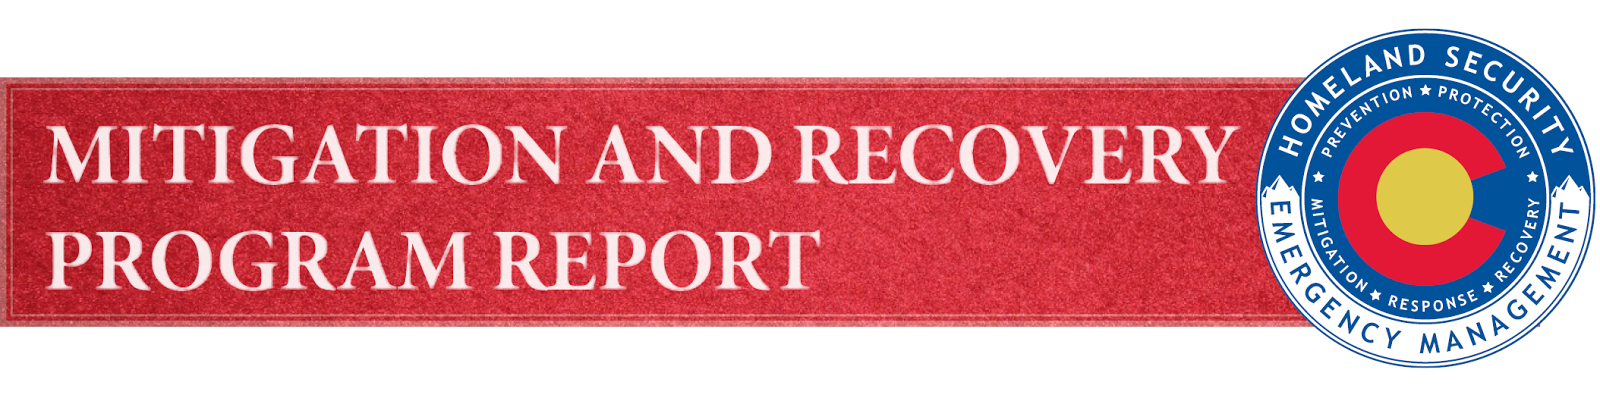 Logo for Mitigation and Recovery Program Report